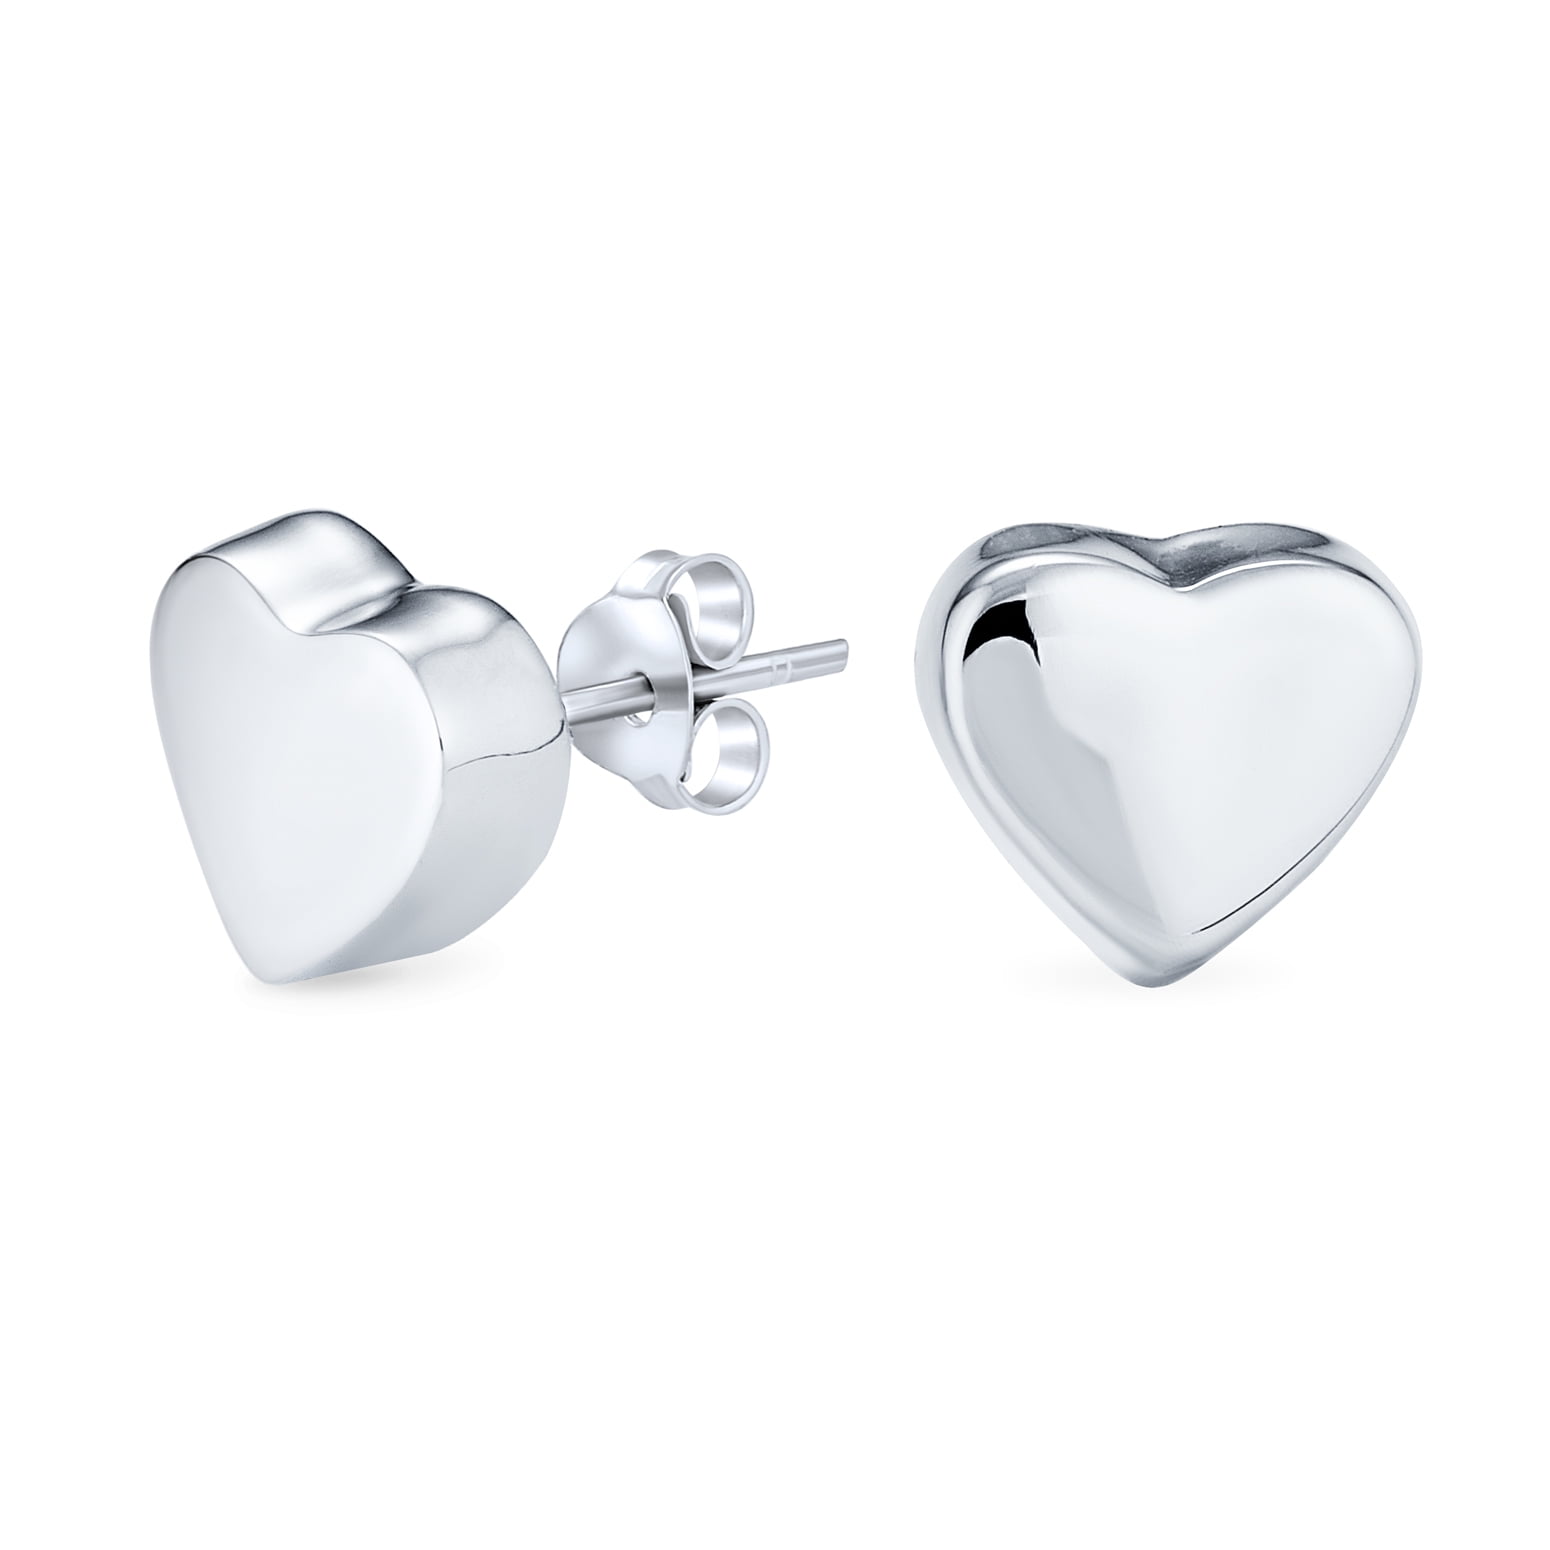 Details about   .925 Sterling Silver 8 MM Children's Heart Post Studs Earrings MSRP $36 